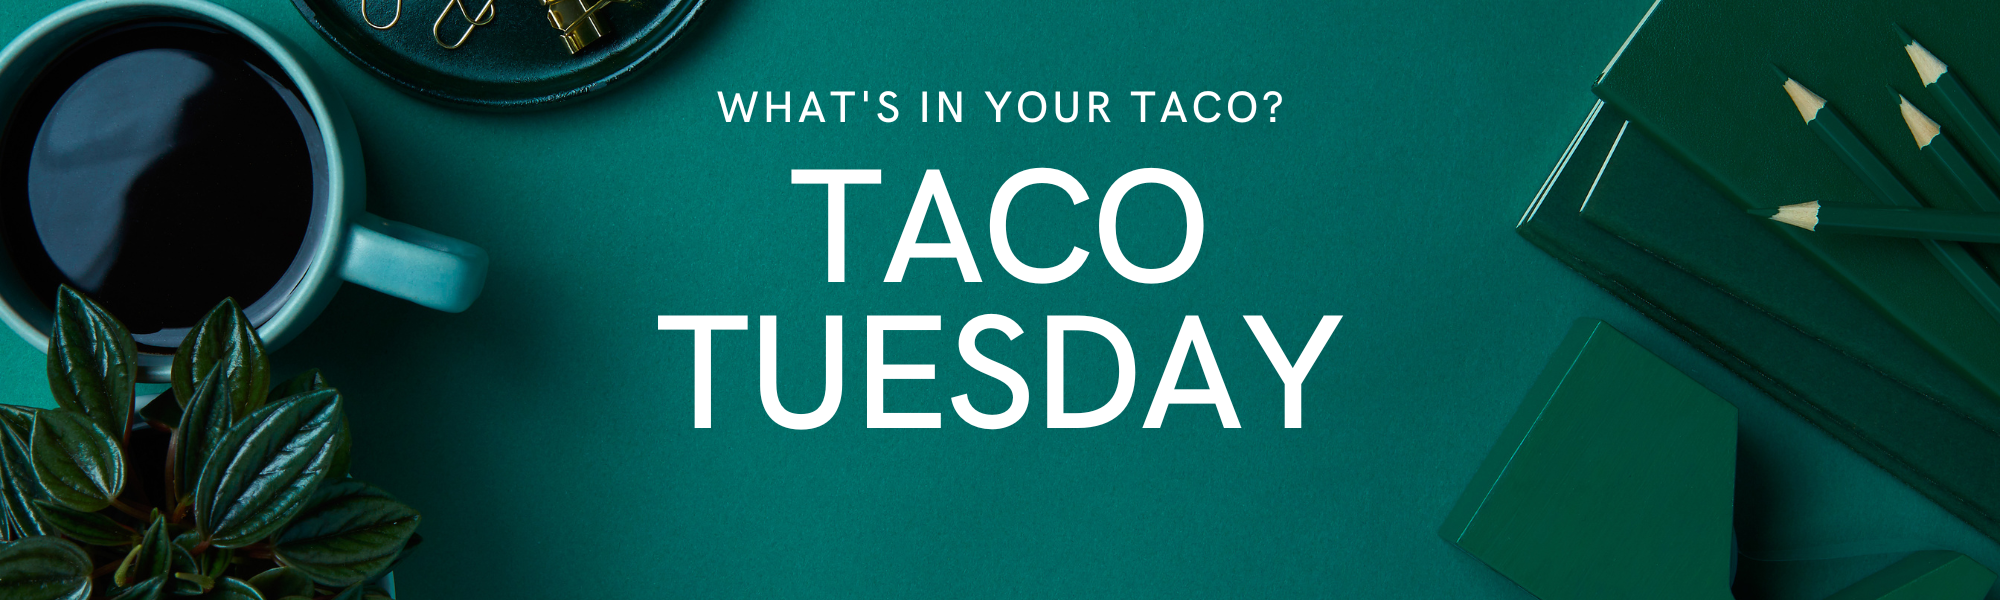 Taco Tuesday in Today’s Newsletter, The Ultimate Need to Knows